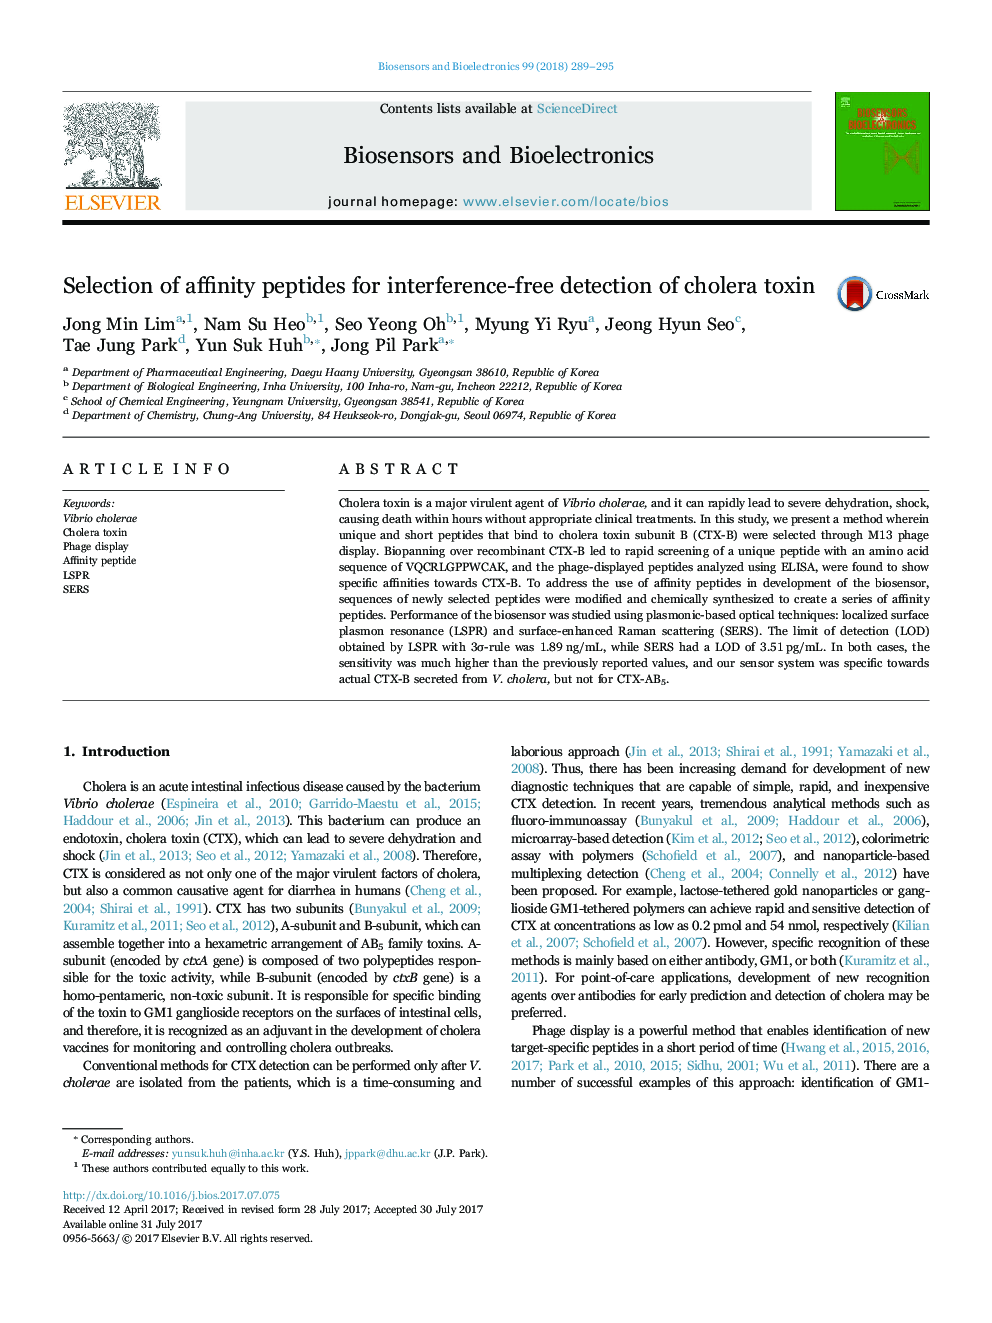 Selection of affinity peptides for interference-free detection of cholera toxin